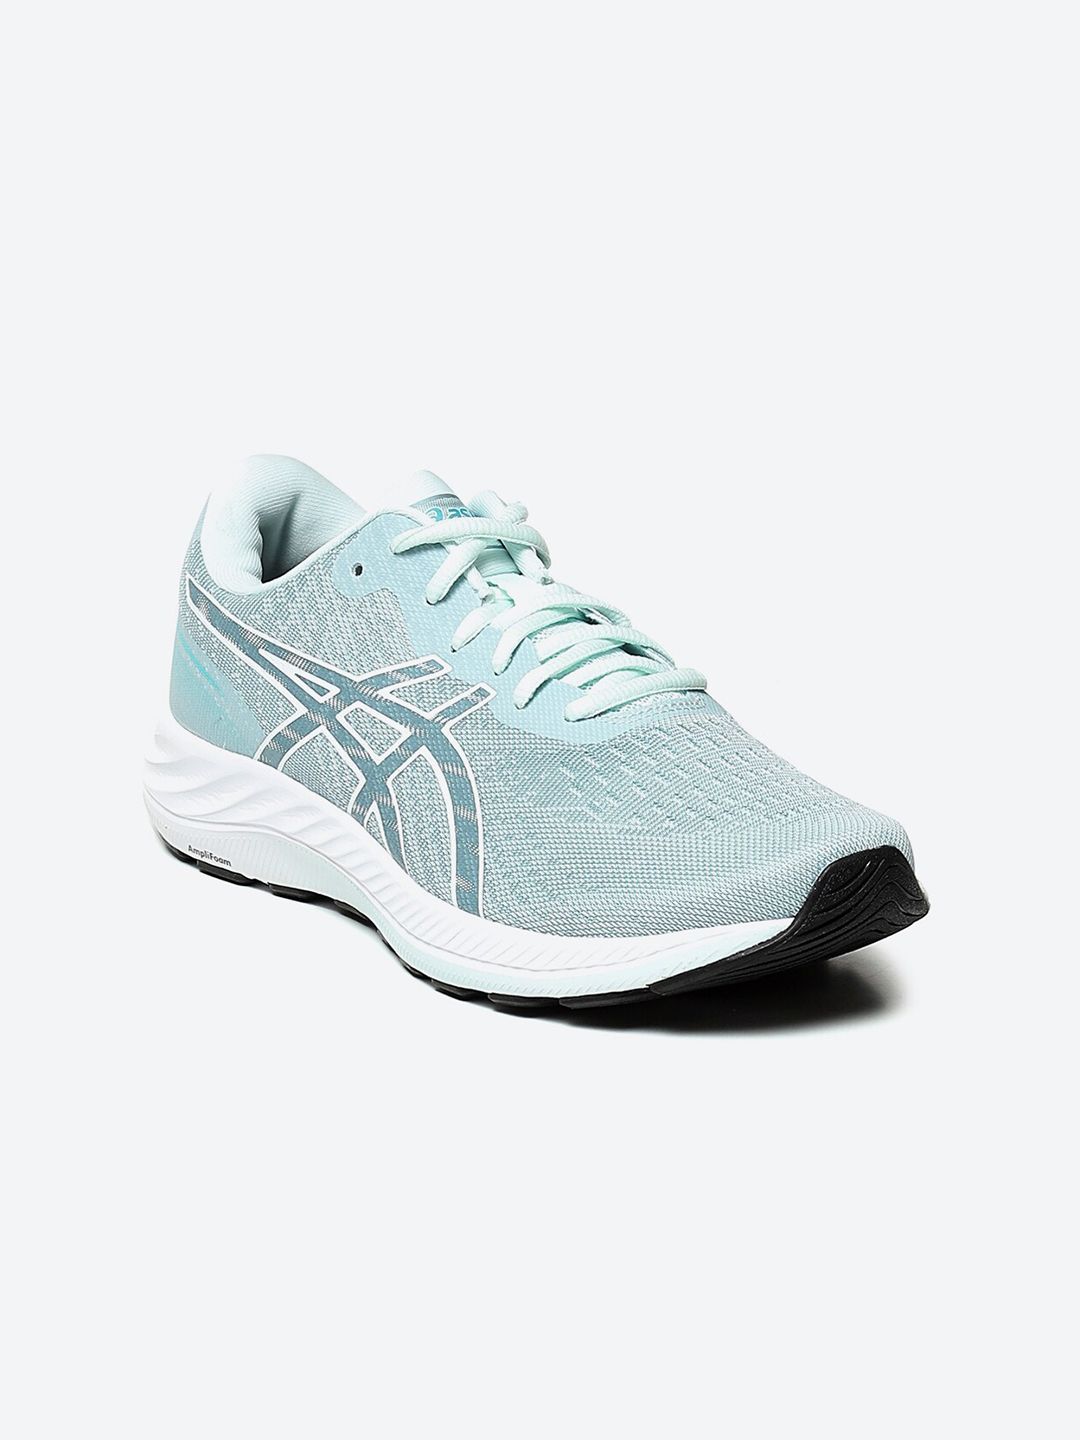 ASICS Gel-Excite 9 Women Green Sports Shoes Price in India